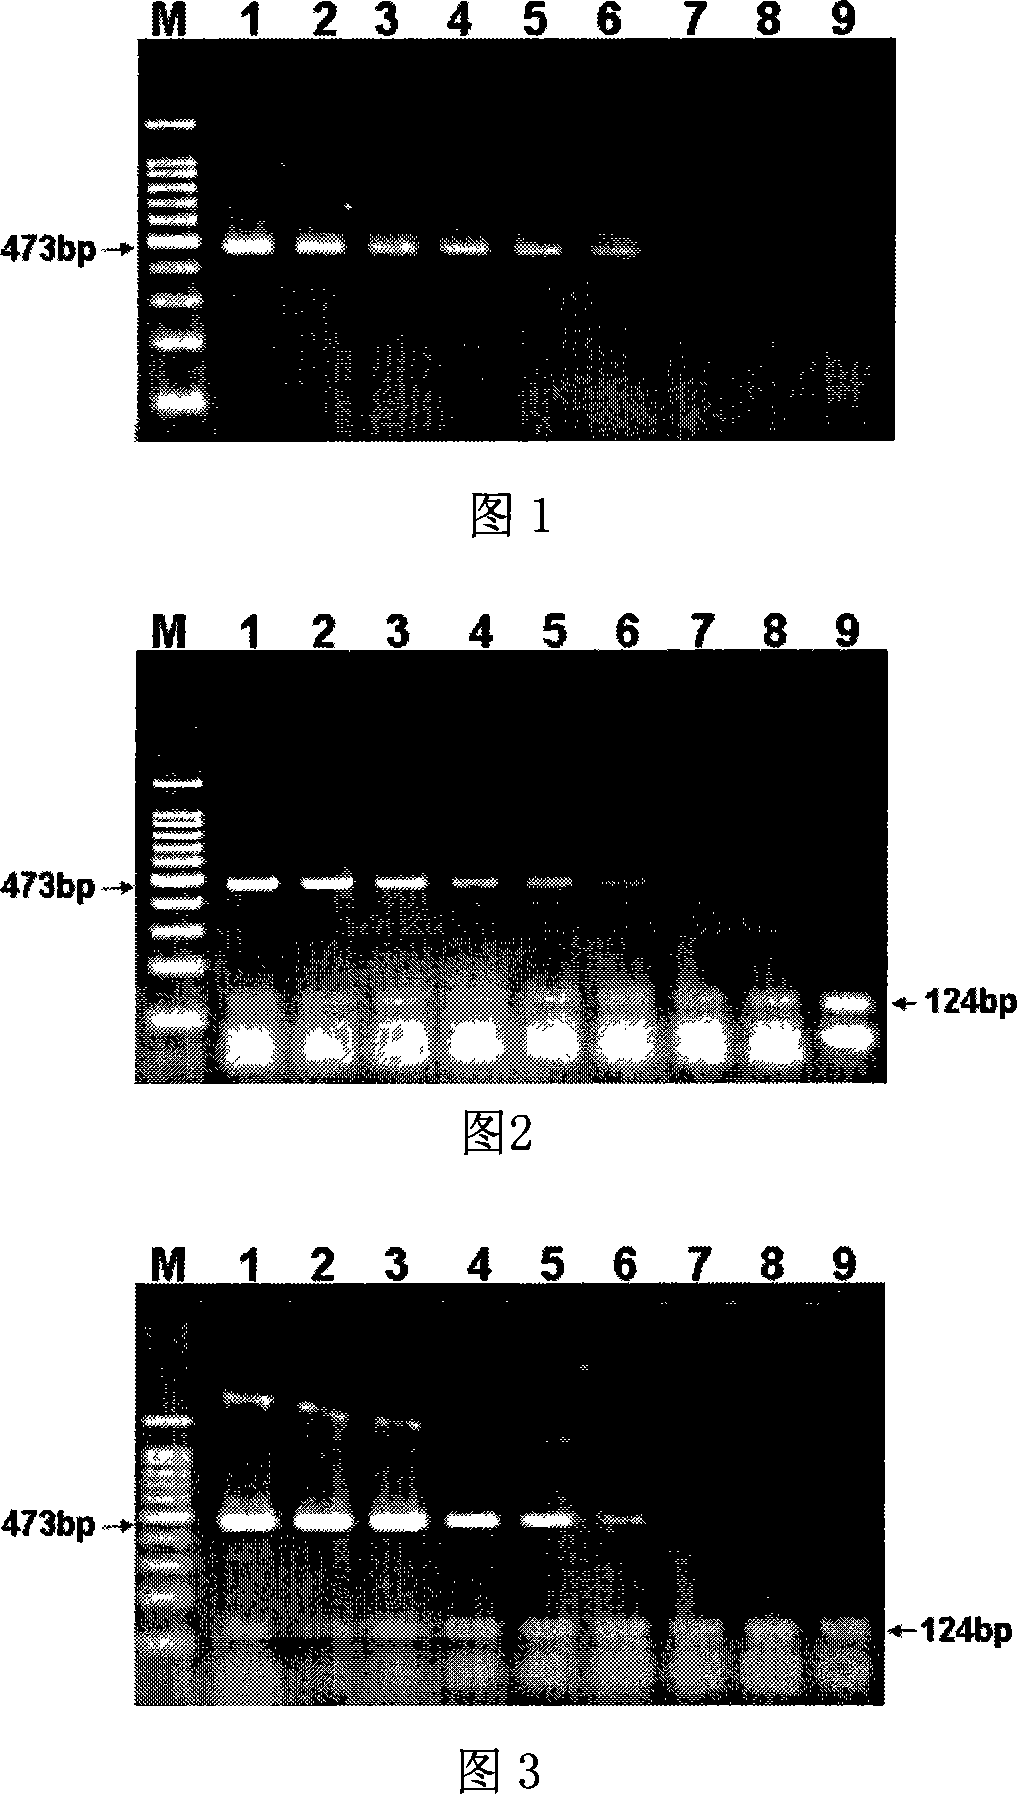 Method for detecting vibrio parahaemolyticus PCR added with amplification internal sign